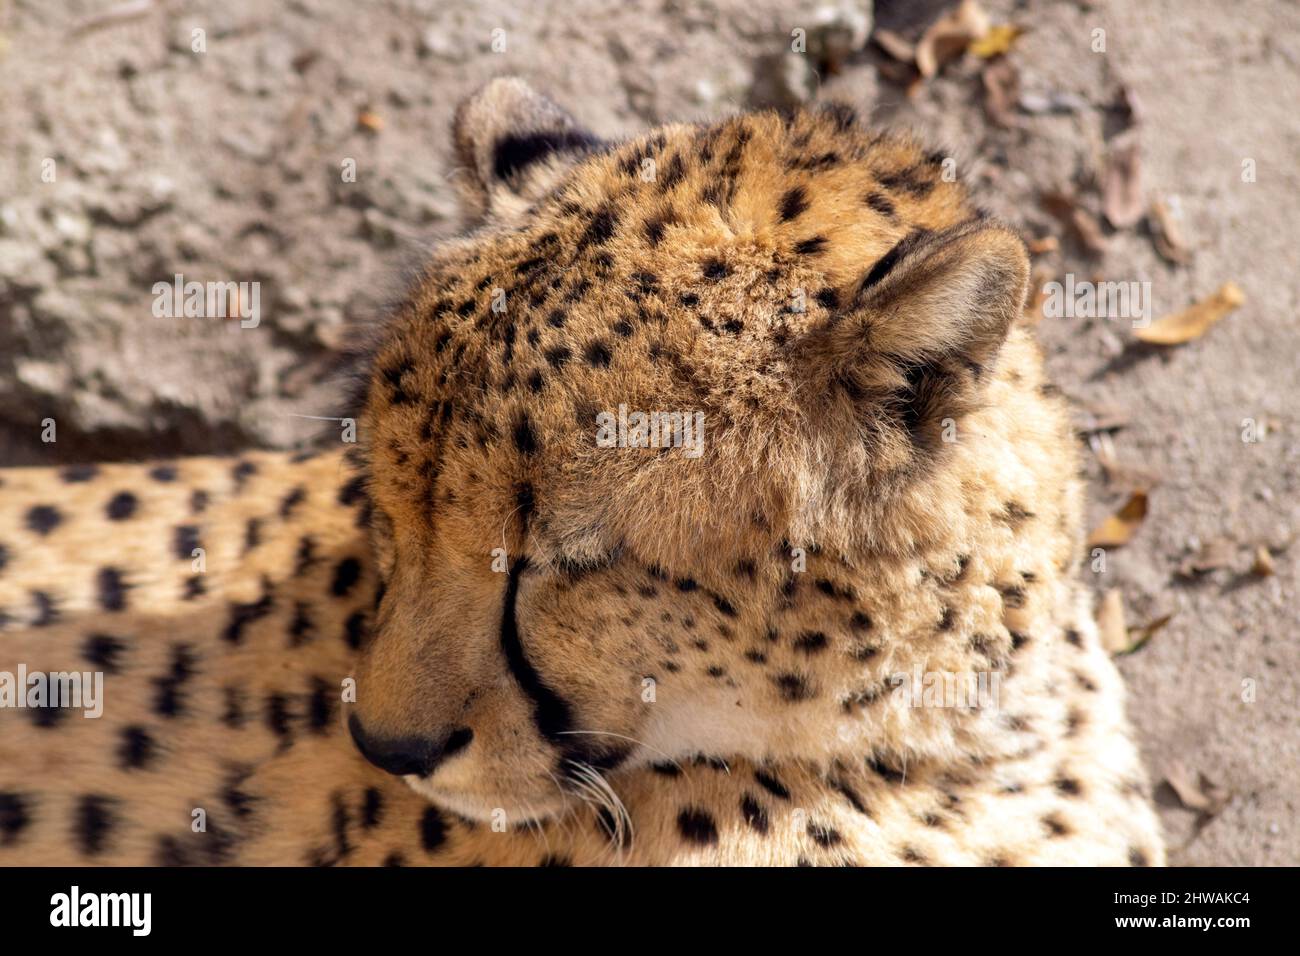 The cheetah portrait, resting, (Acinonyx jubatus) is a large cat native to Africa and central Iran. It is the fastest land animal.Threatened species. Stock Photo